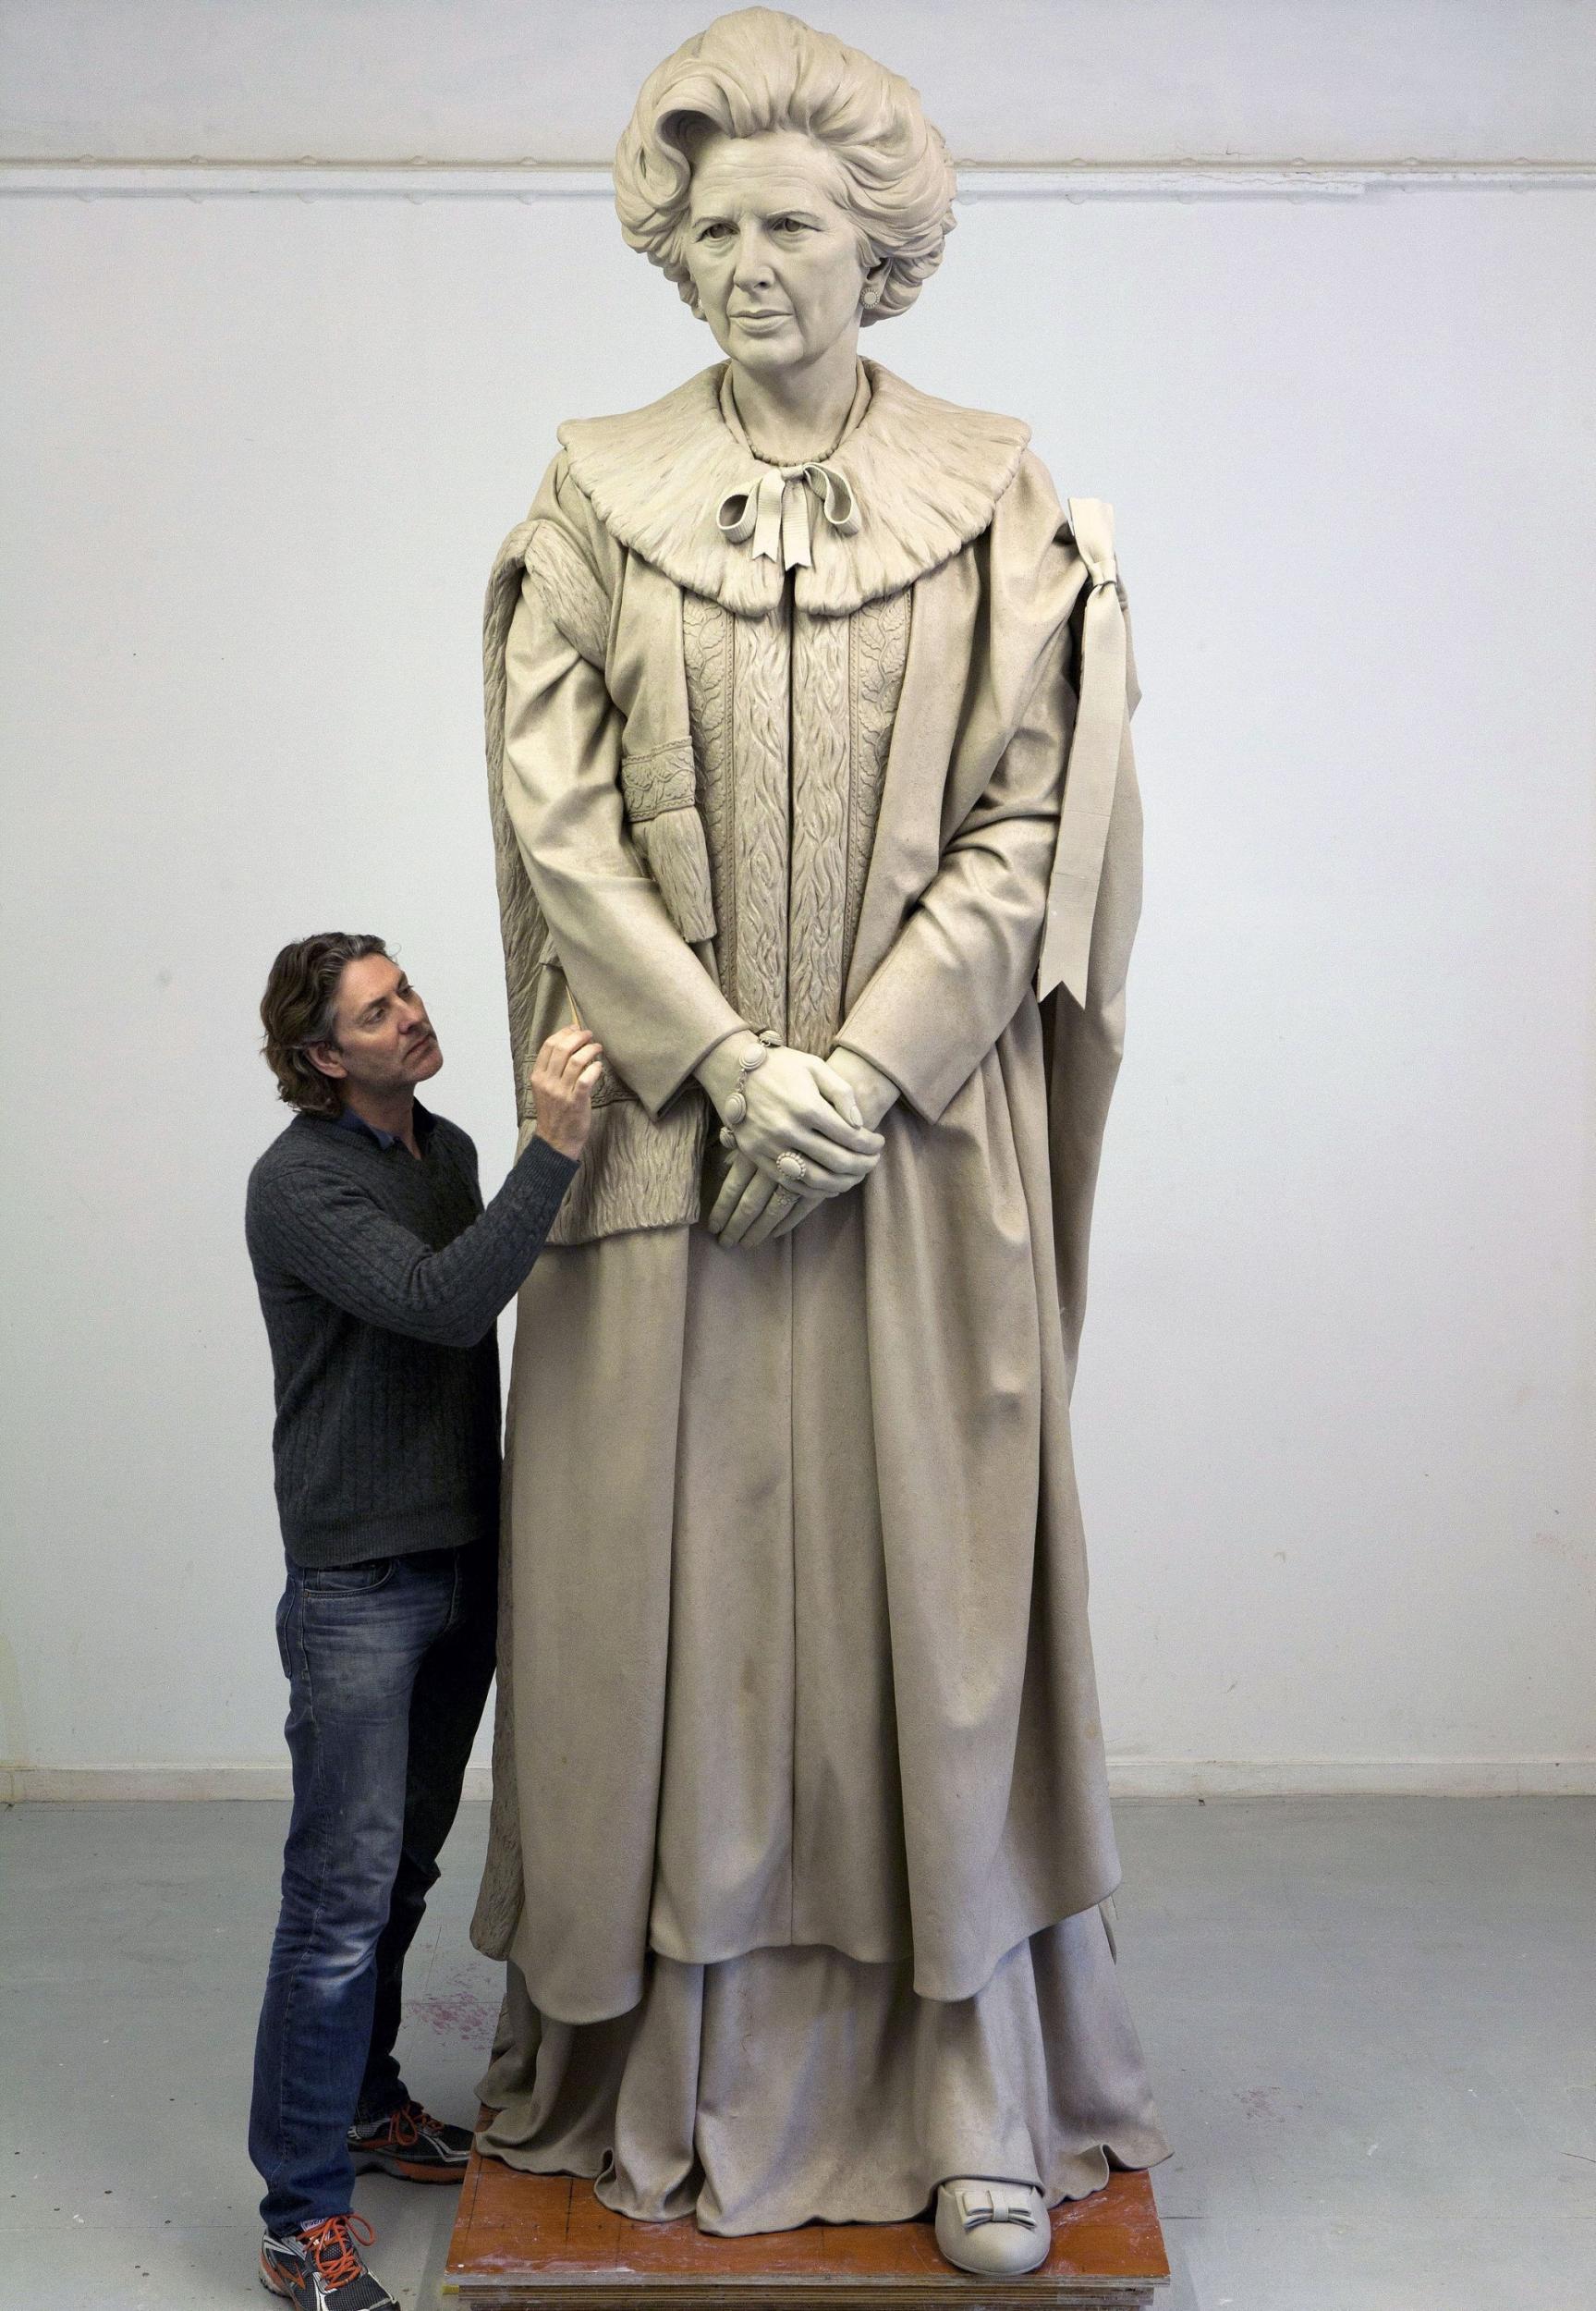 Sculptor Douglas Jennings' statue of Margaret Thatcher. Plans for the statue to be erected in Thatcher's home town of Grantham have been unanimously approved by South Kesteven District Council despite vandalism concerns.